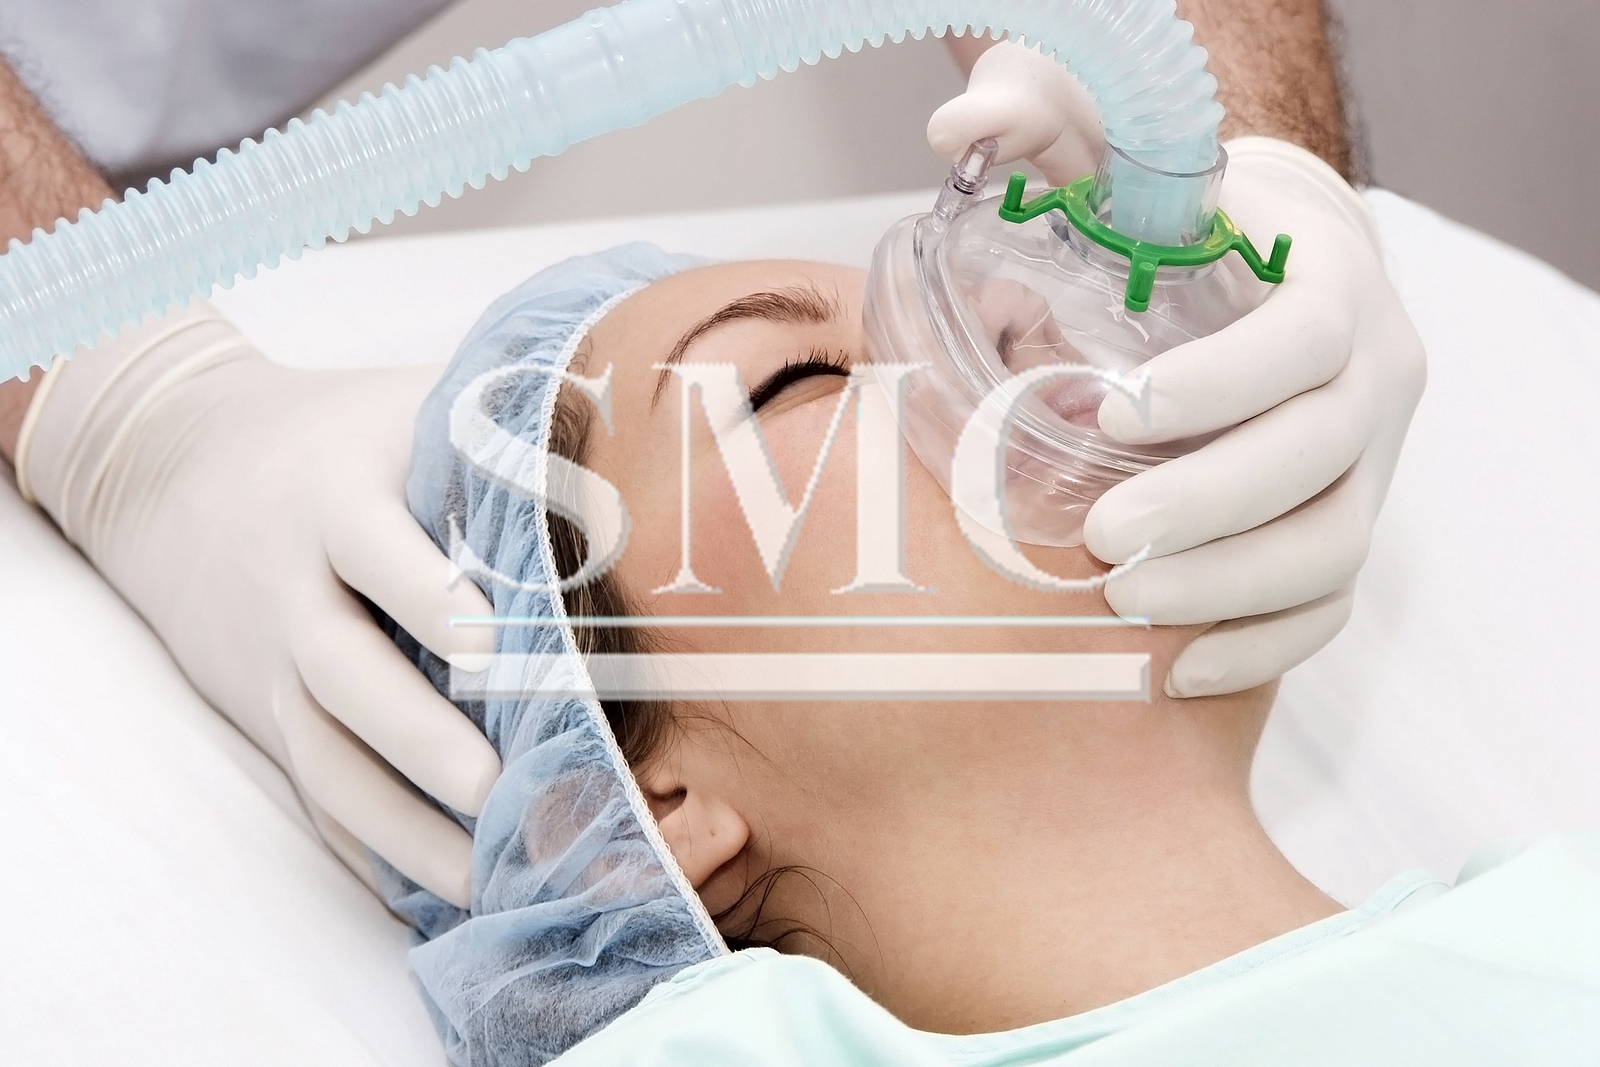 What is anesthesia mask used for?